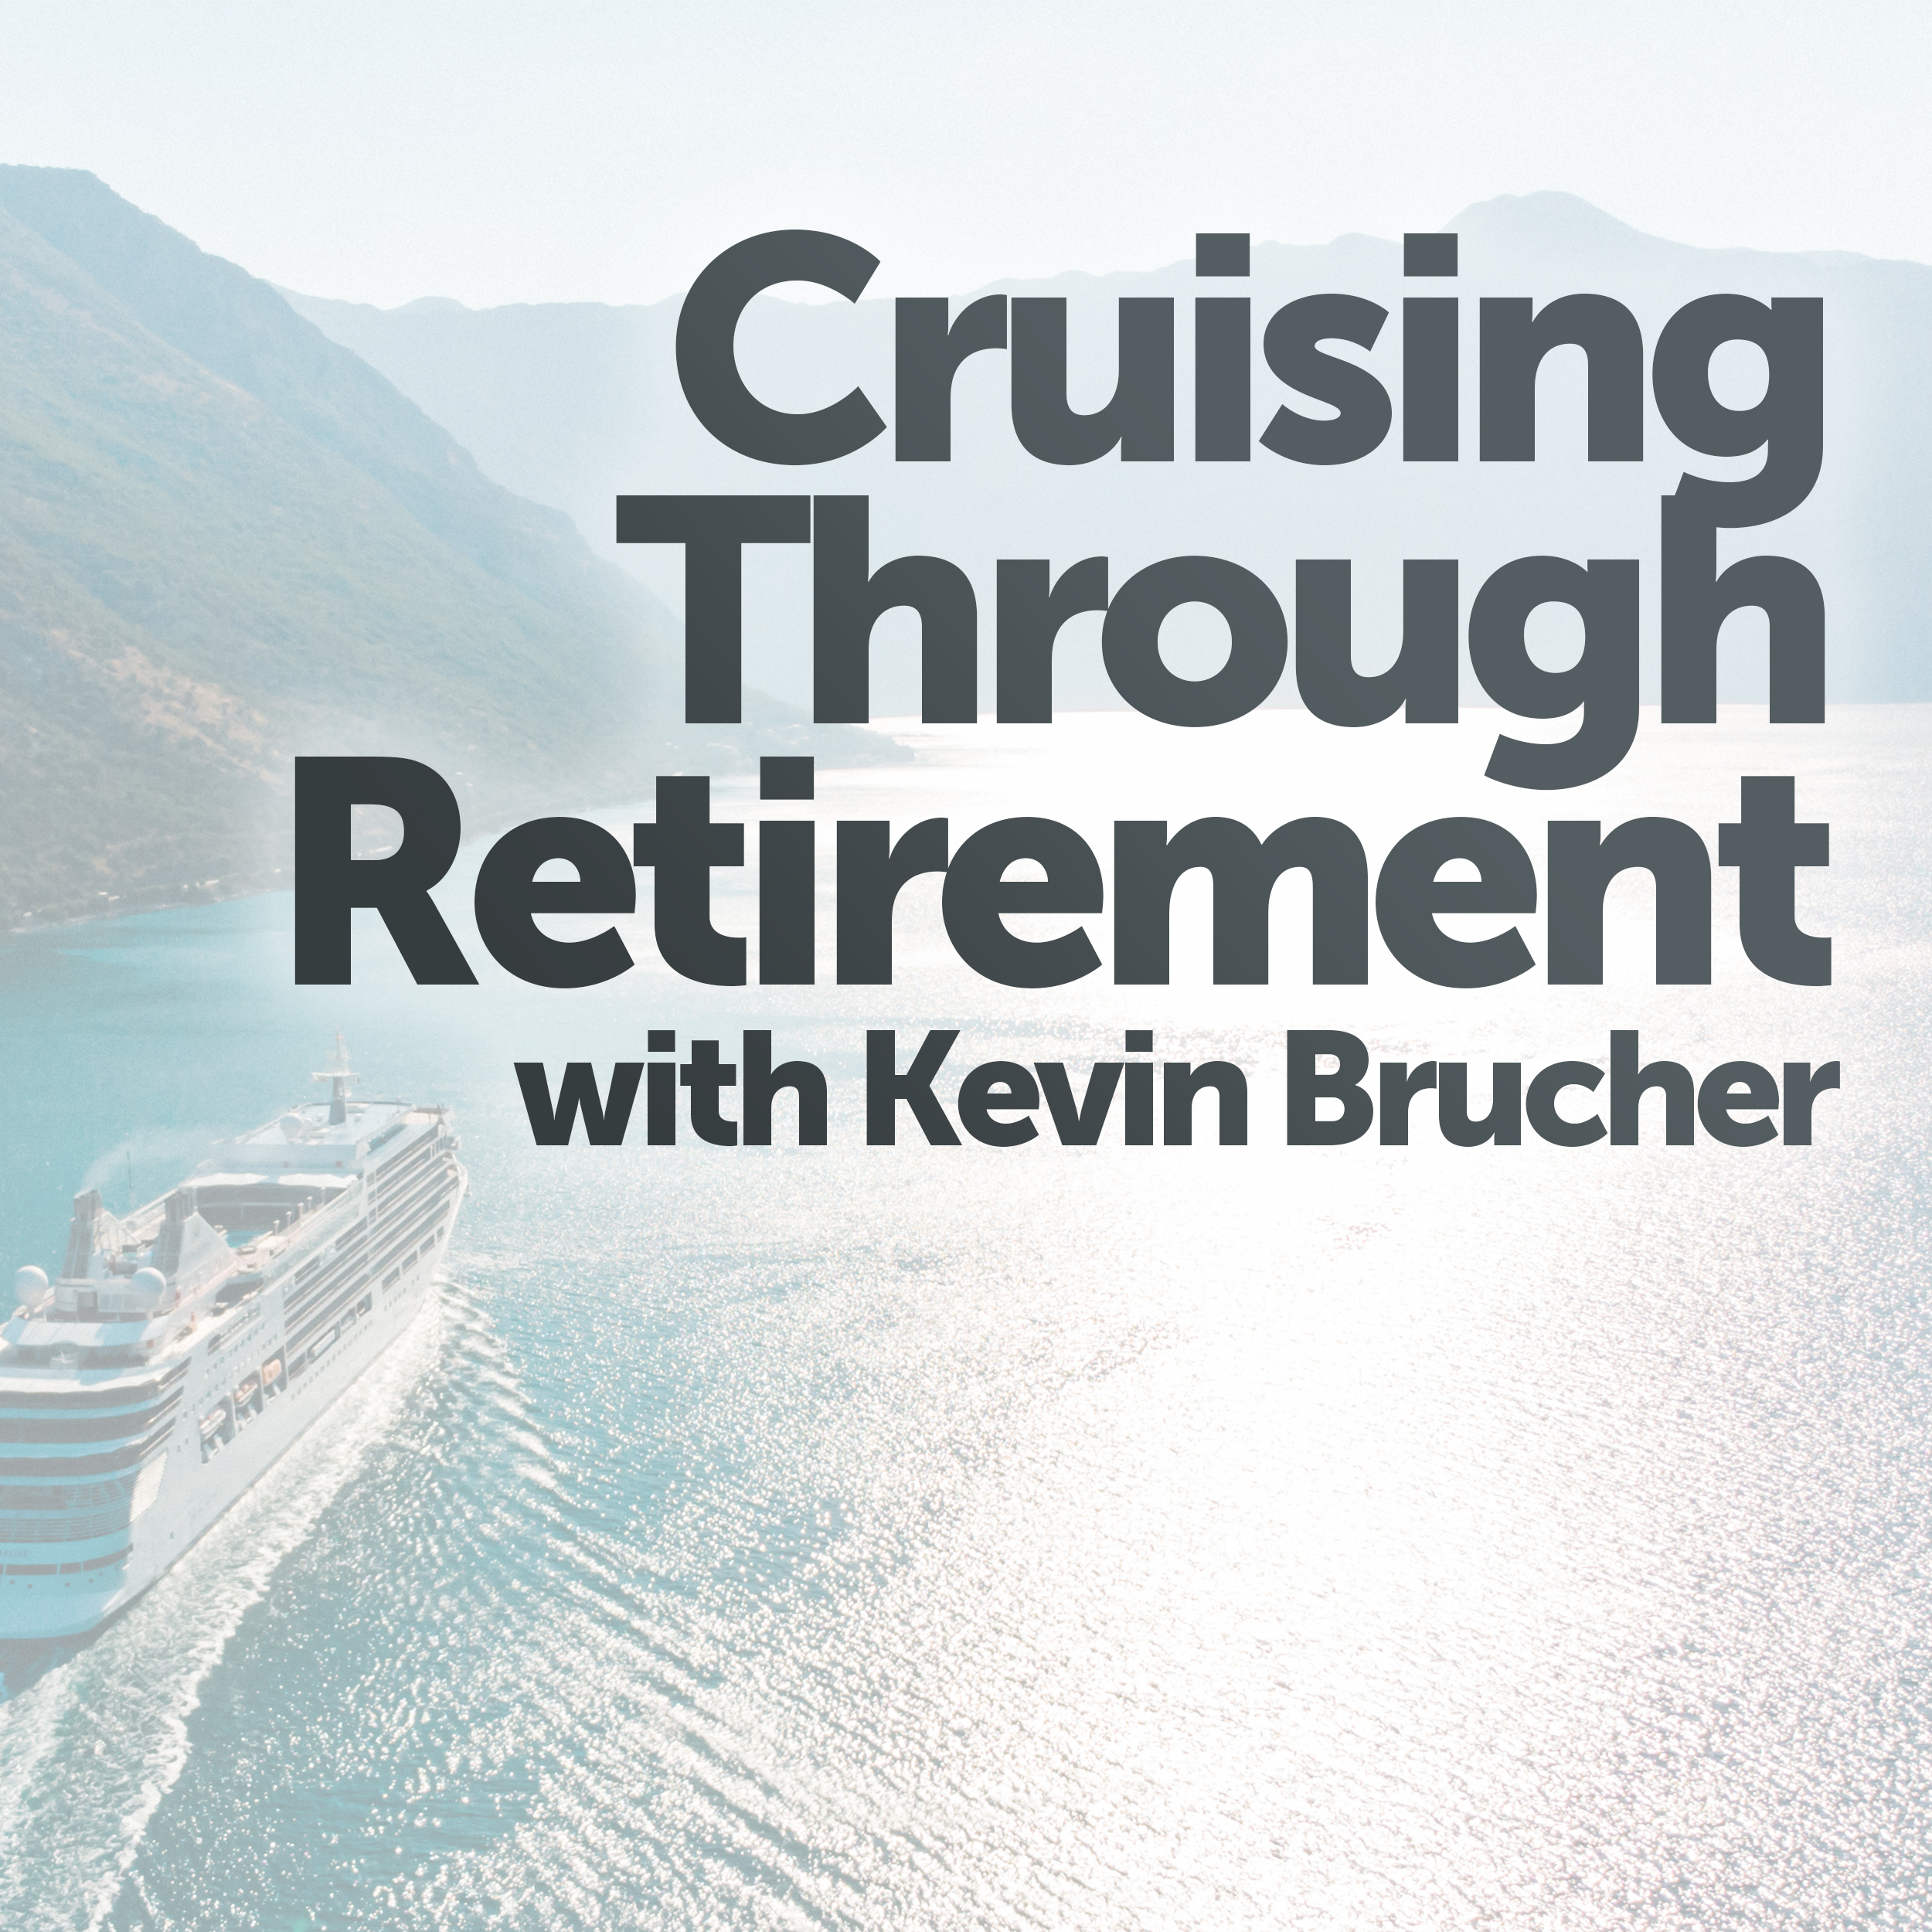 Ep 105 Cruising Through Retirement  This week Kevin Brucher digs into the numbers and offers his insight to achieving a successful retirement.